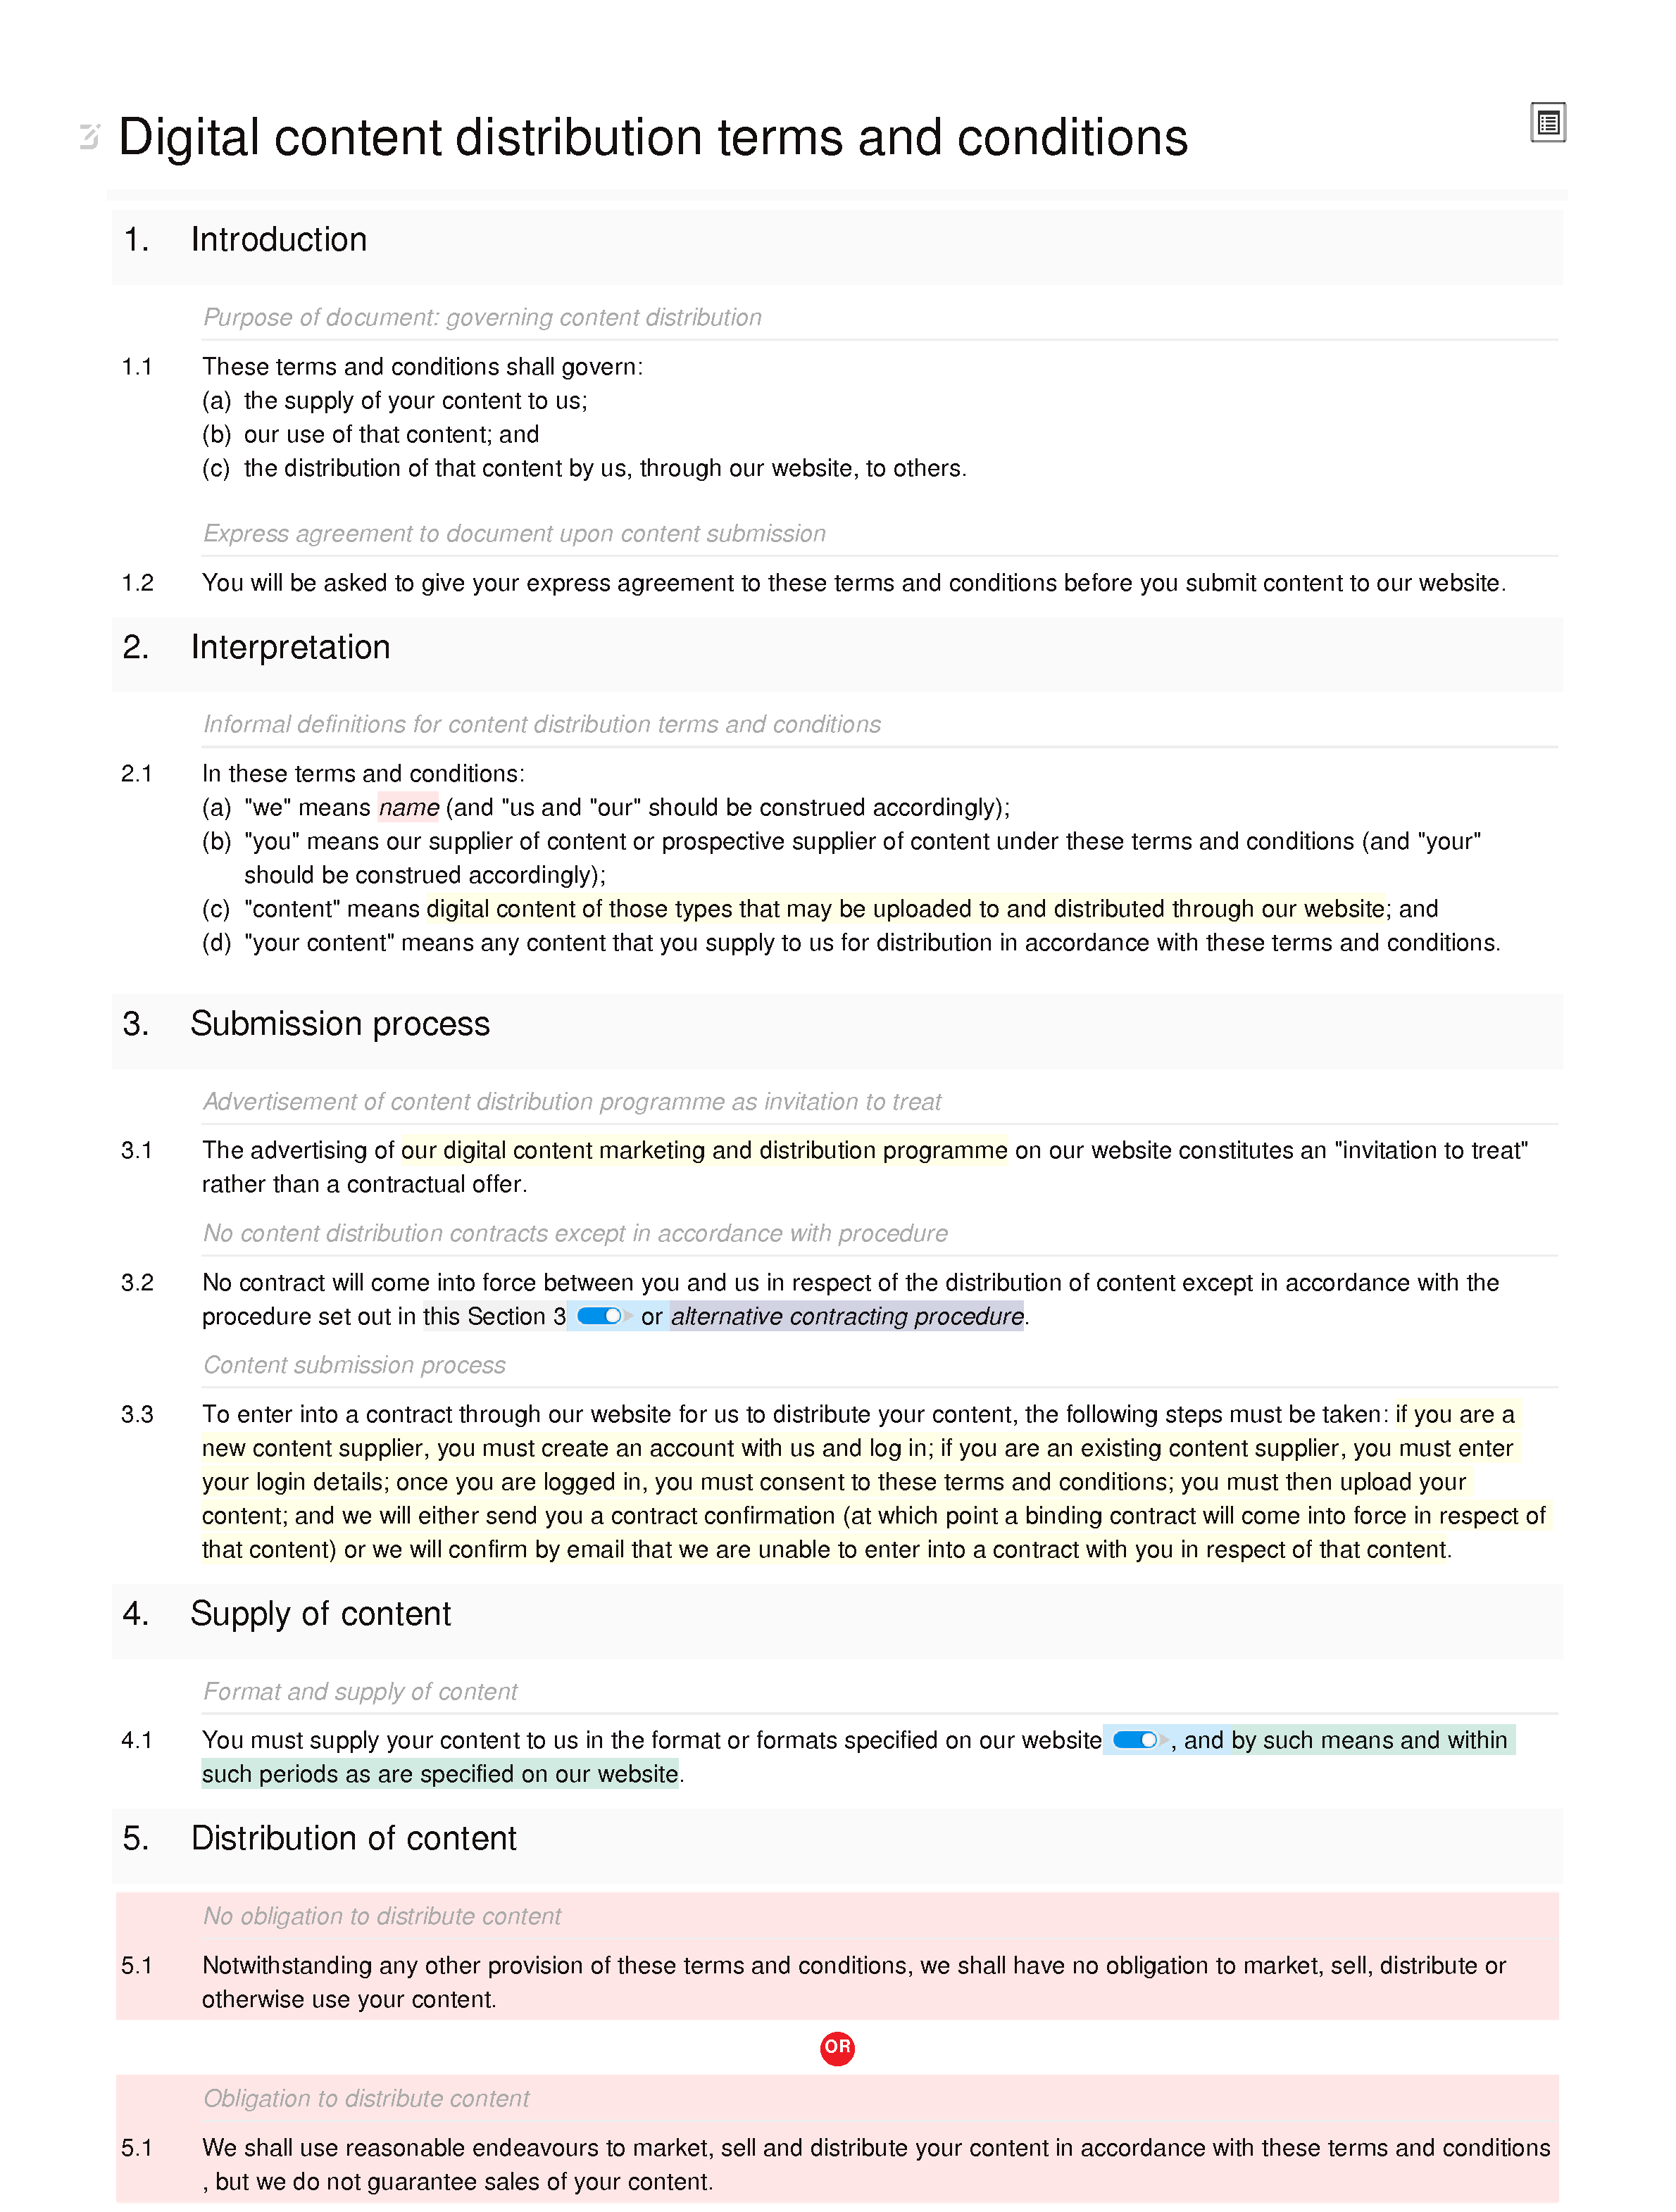 Digital content distribution terms and conditions document editor preview